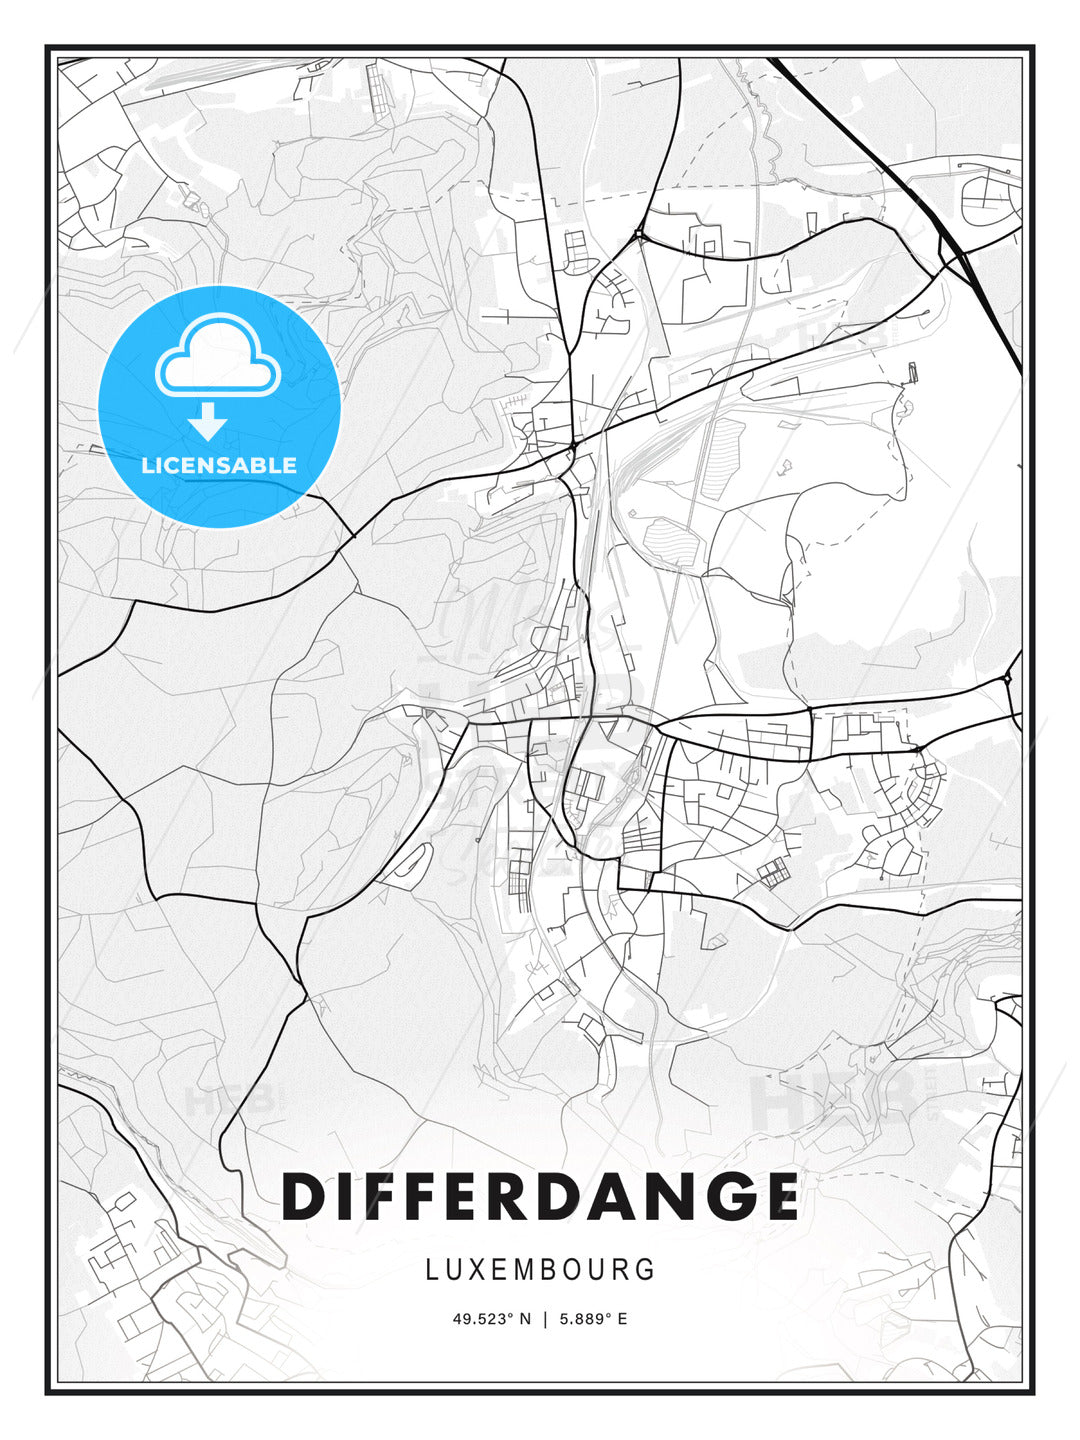 Differdange, Luxembourg, Modern Print Template in Various Formats - HEBSTREITS Sketches